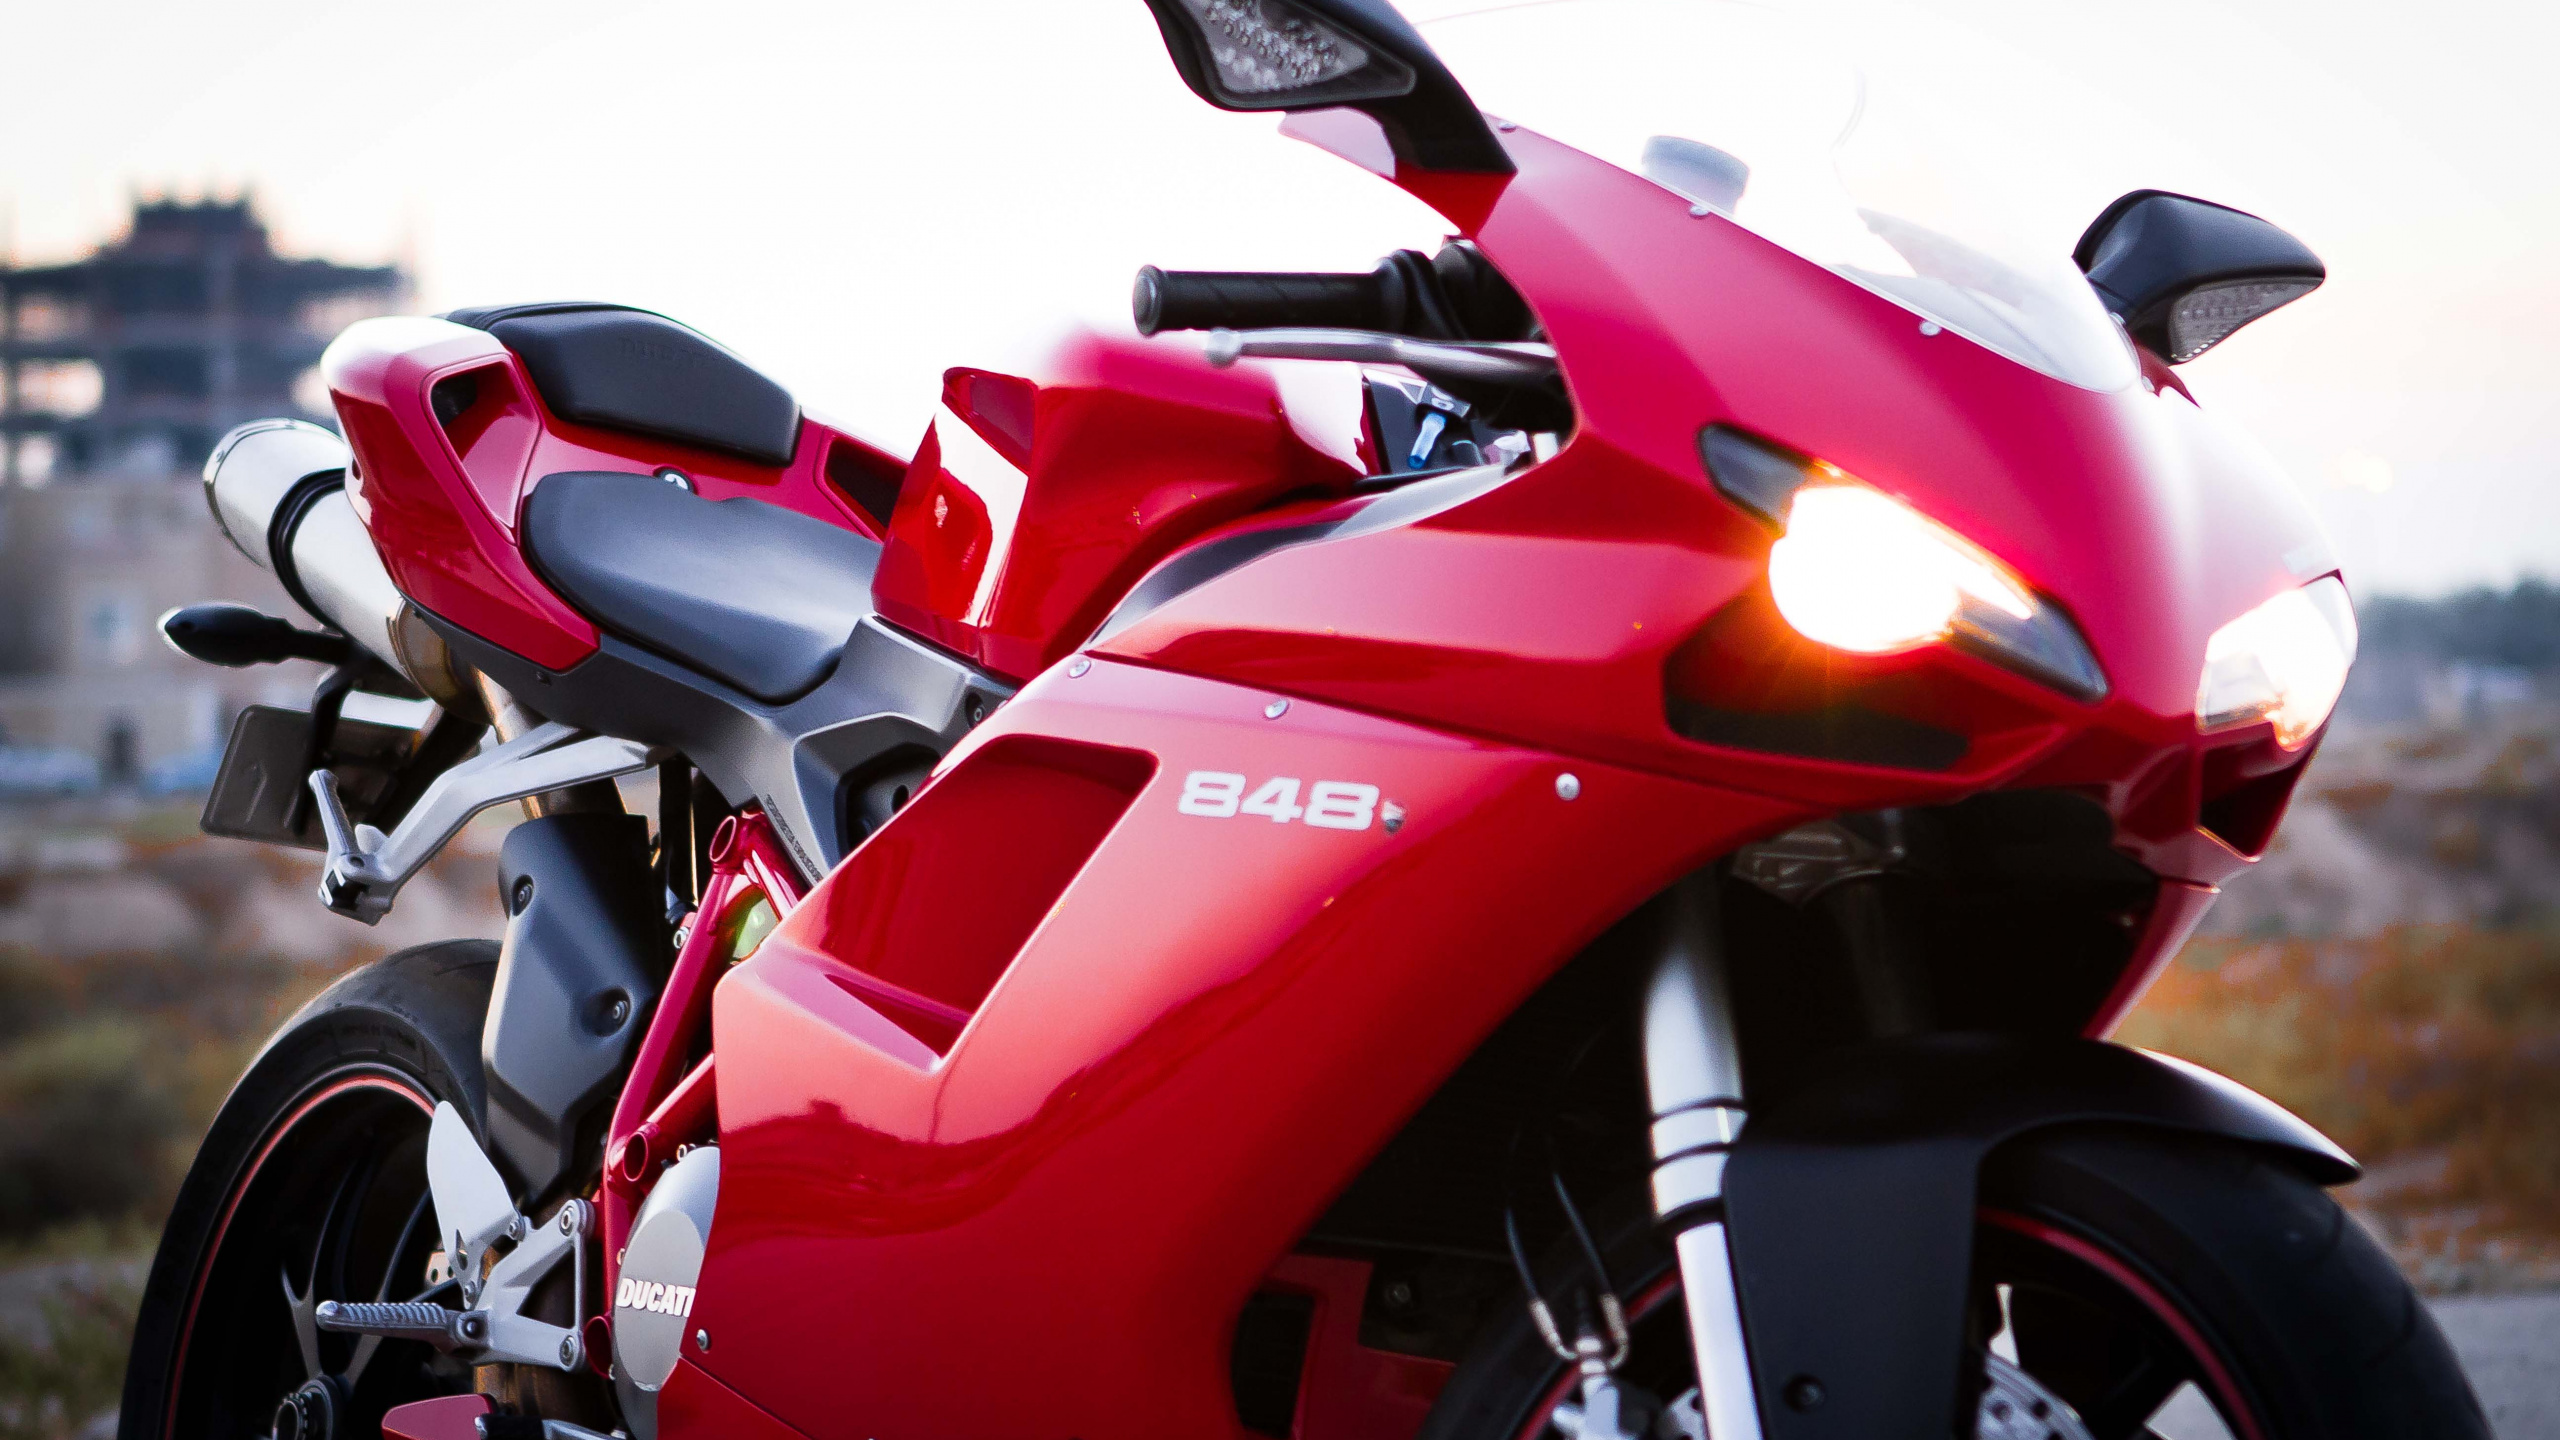 Red and Black Sports Bike. Wallpaper in 2560x1440 Resolution